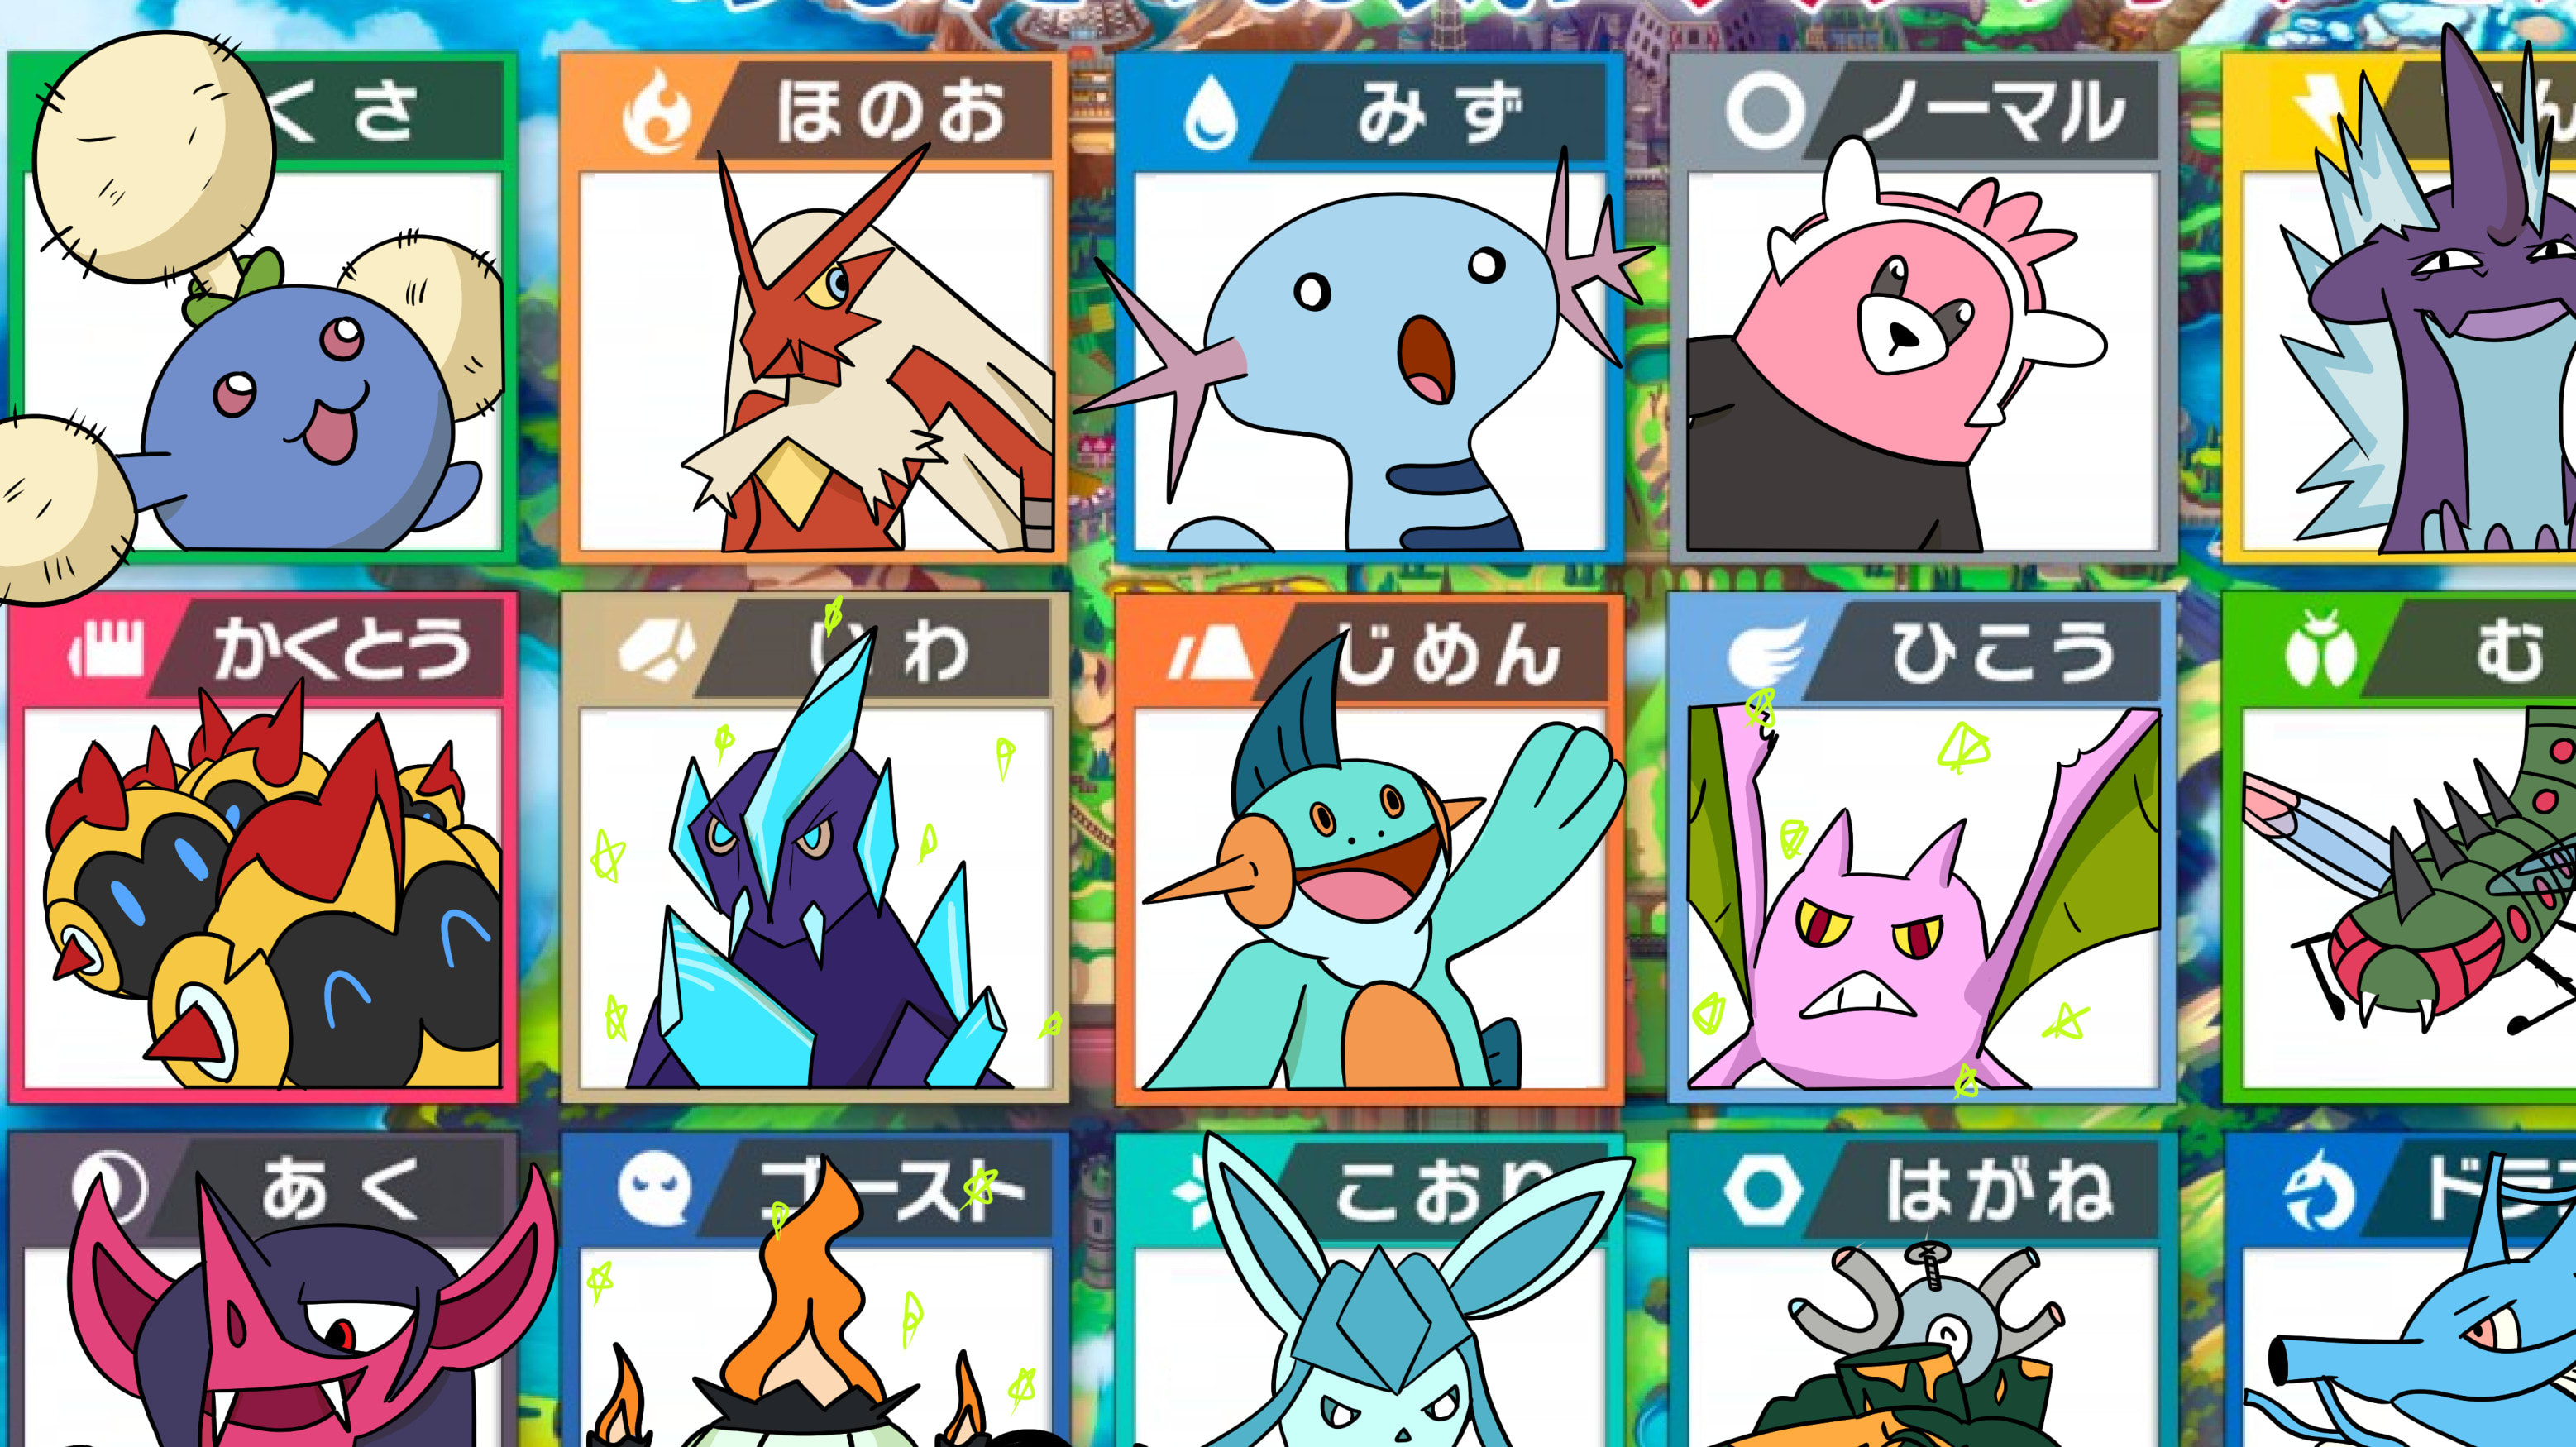 All my fav pokemon from each type(i only fou d the page to make